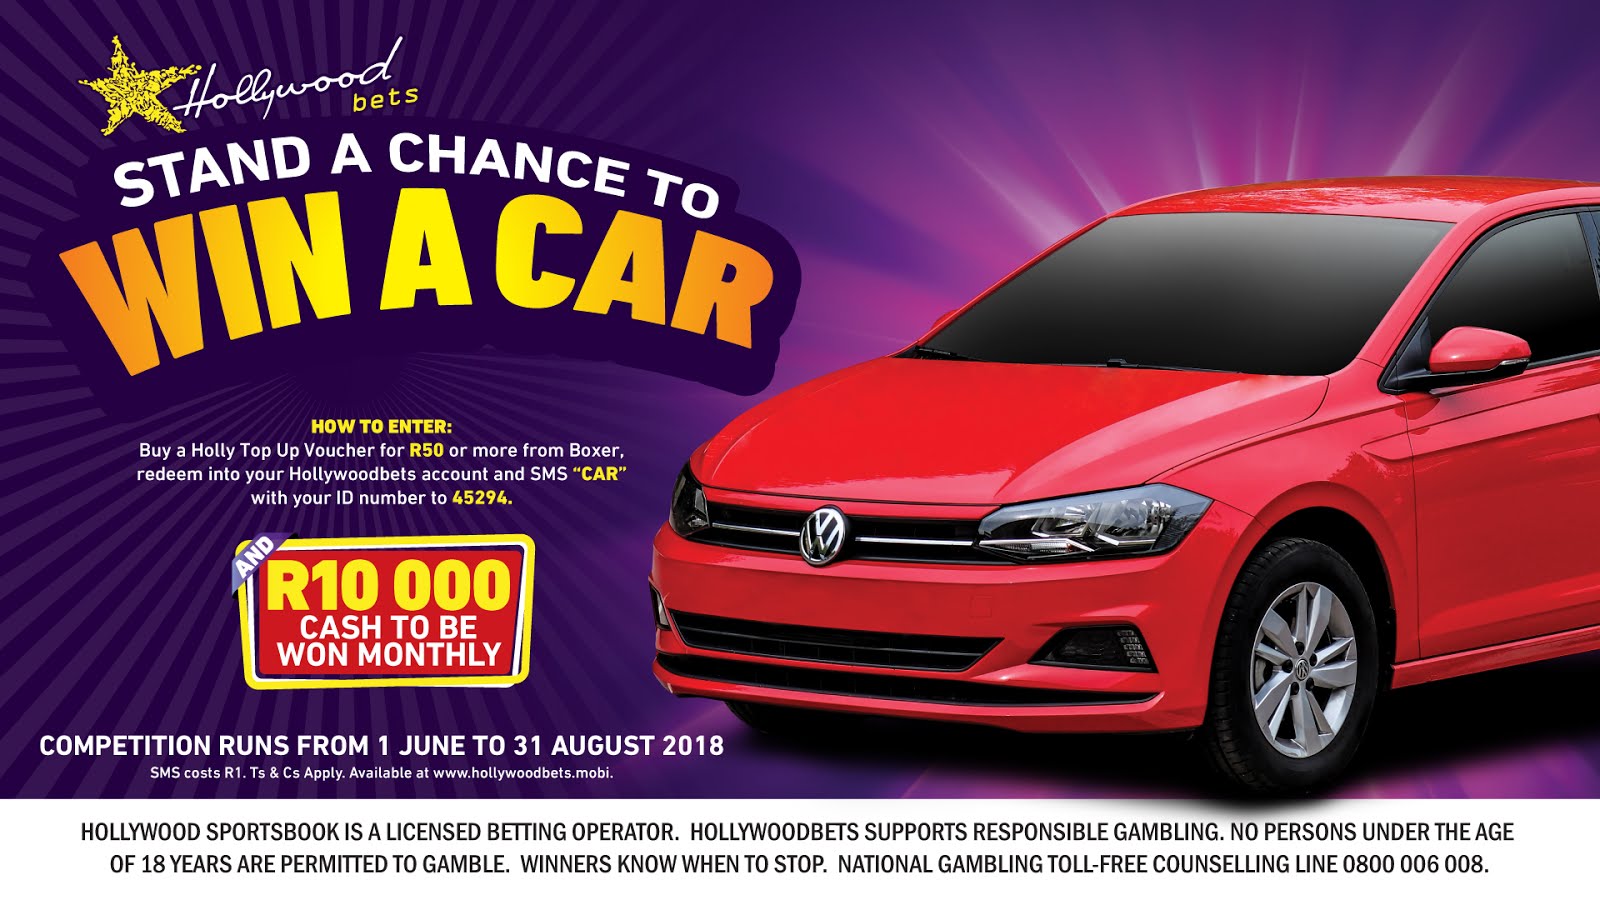 Win a car with Hollywoodbets and Boxer. Buy Top Up Vouchers at any Boxer Store for R50 or more.